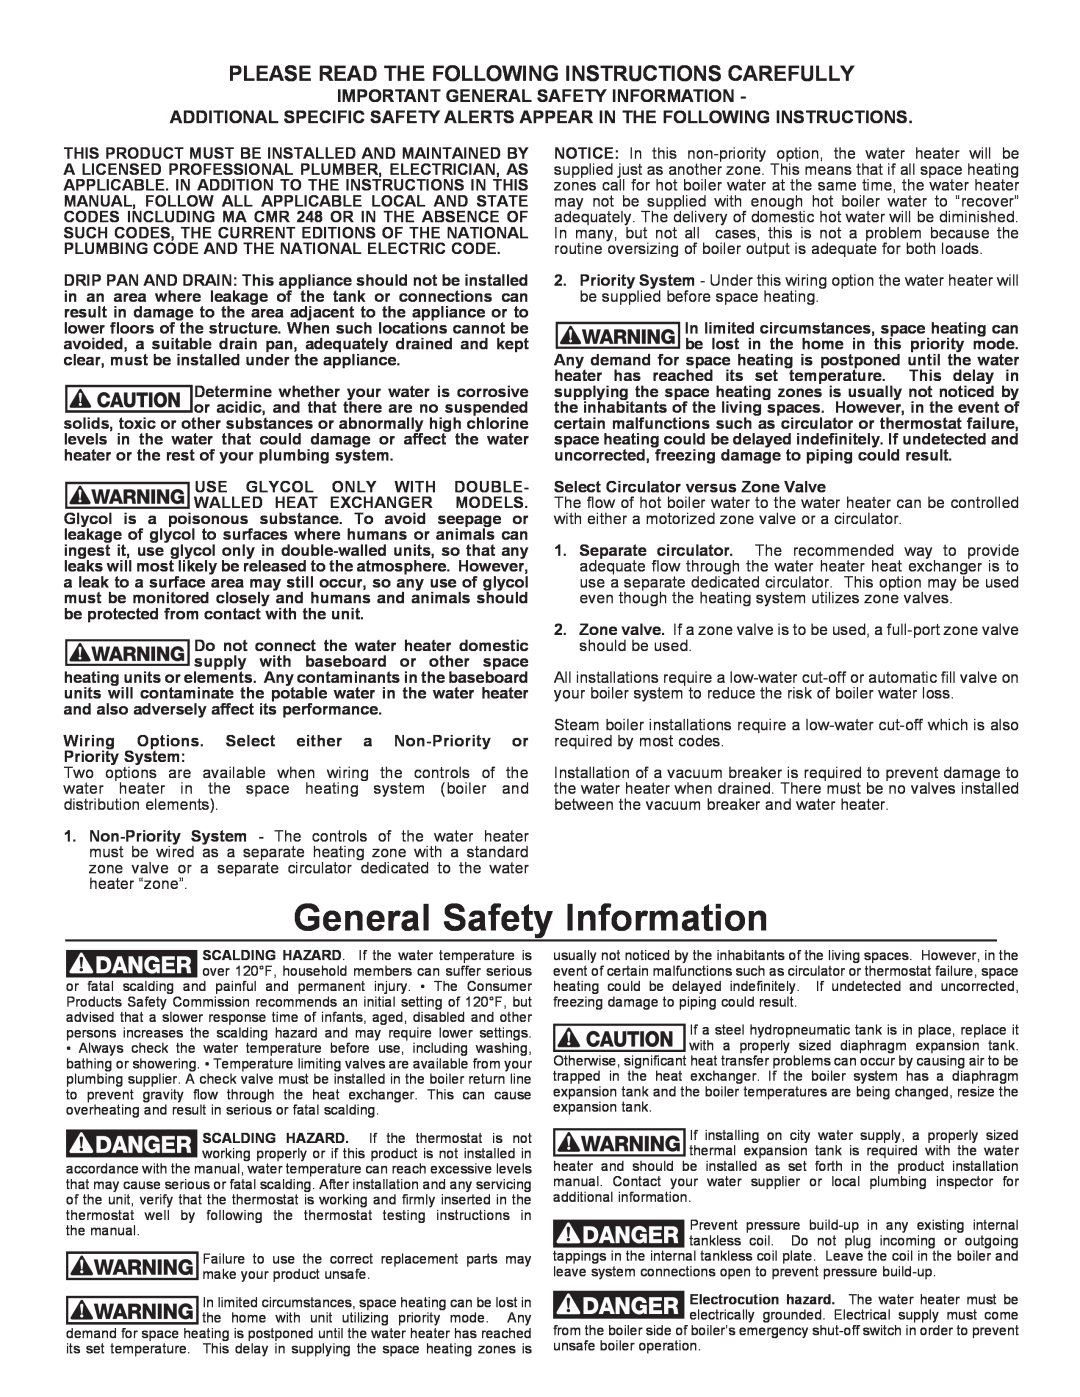 Amtrol whs-series warranty Important General Safety Information, Please Read The Following Instructions Carefully 